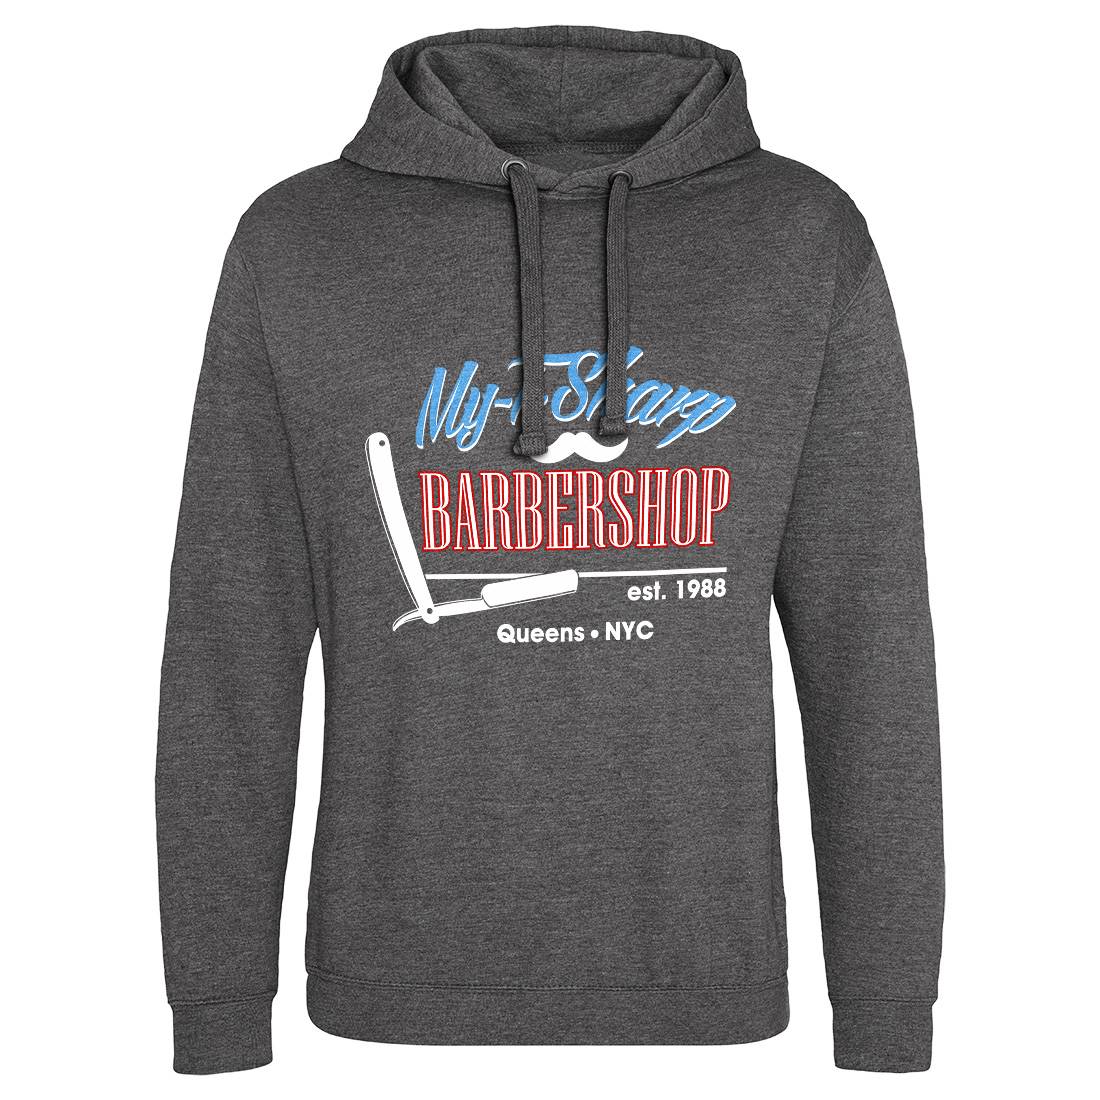 My-T-Sharp Mens Hoodie Without Pocket Barber D267